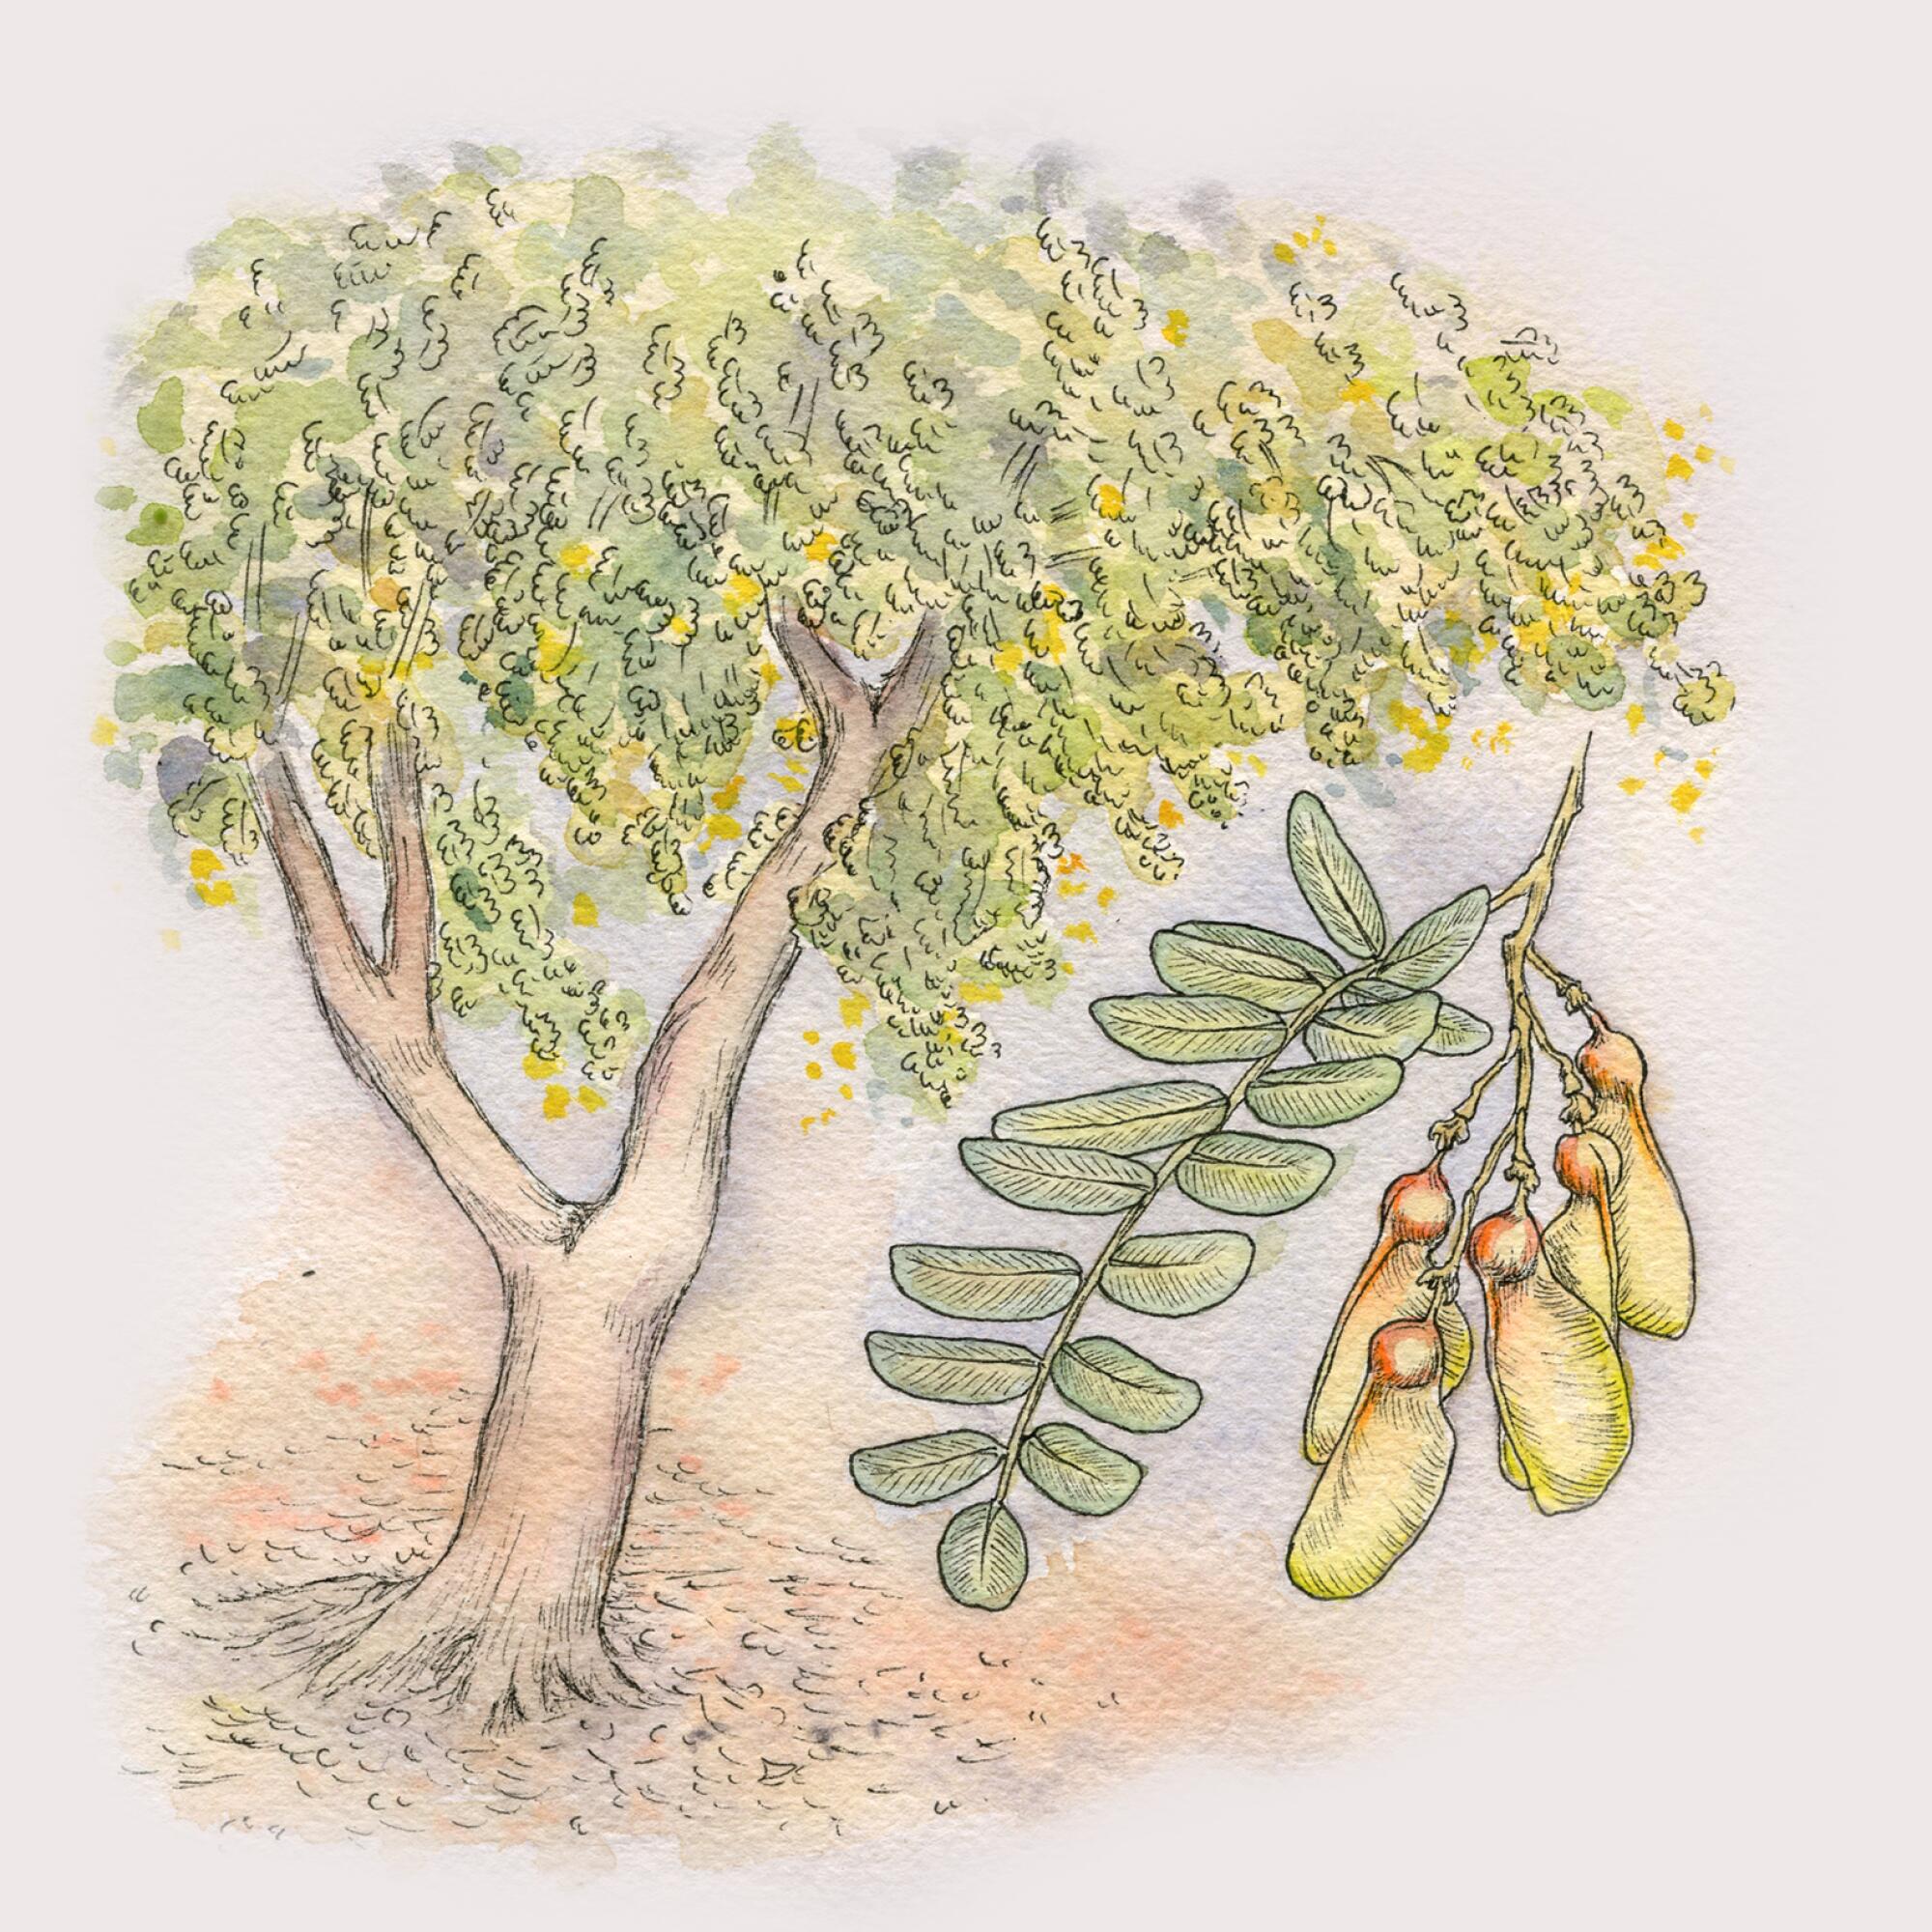 A tipu tree with a closeup illustration of its leaves and seedpods